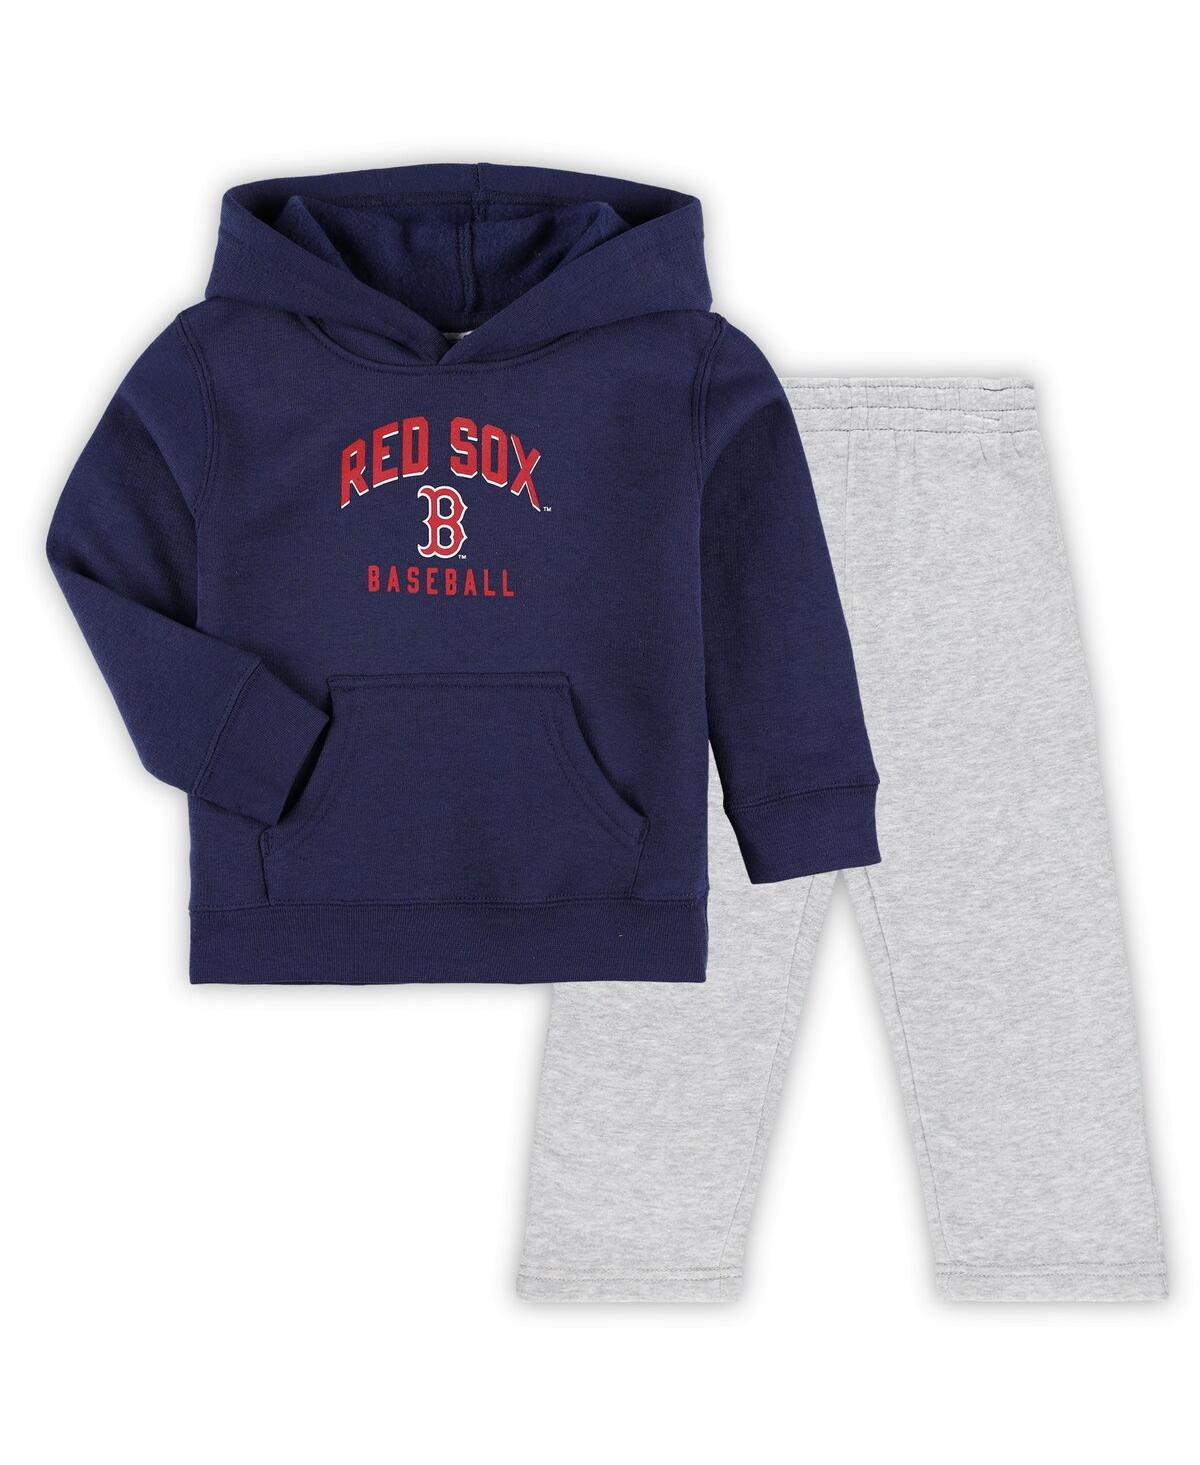 Outerstuff Babies' Toddler Boys Navy, Gray Boston Red Sox Play-by-play Pullover Fleece Hoodie And Pants Set In Navy,gray